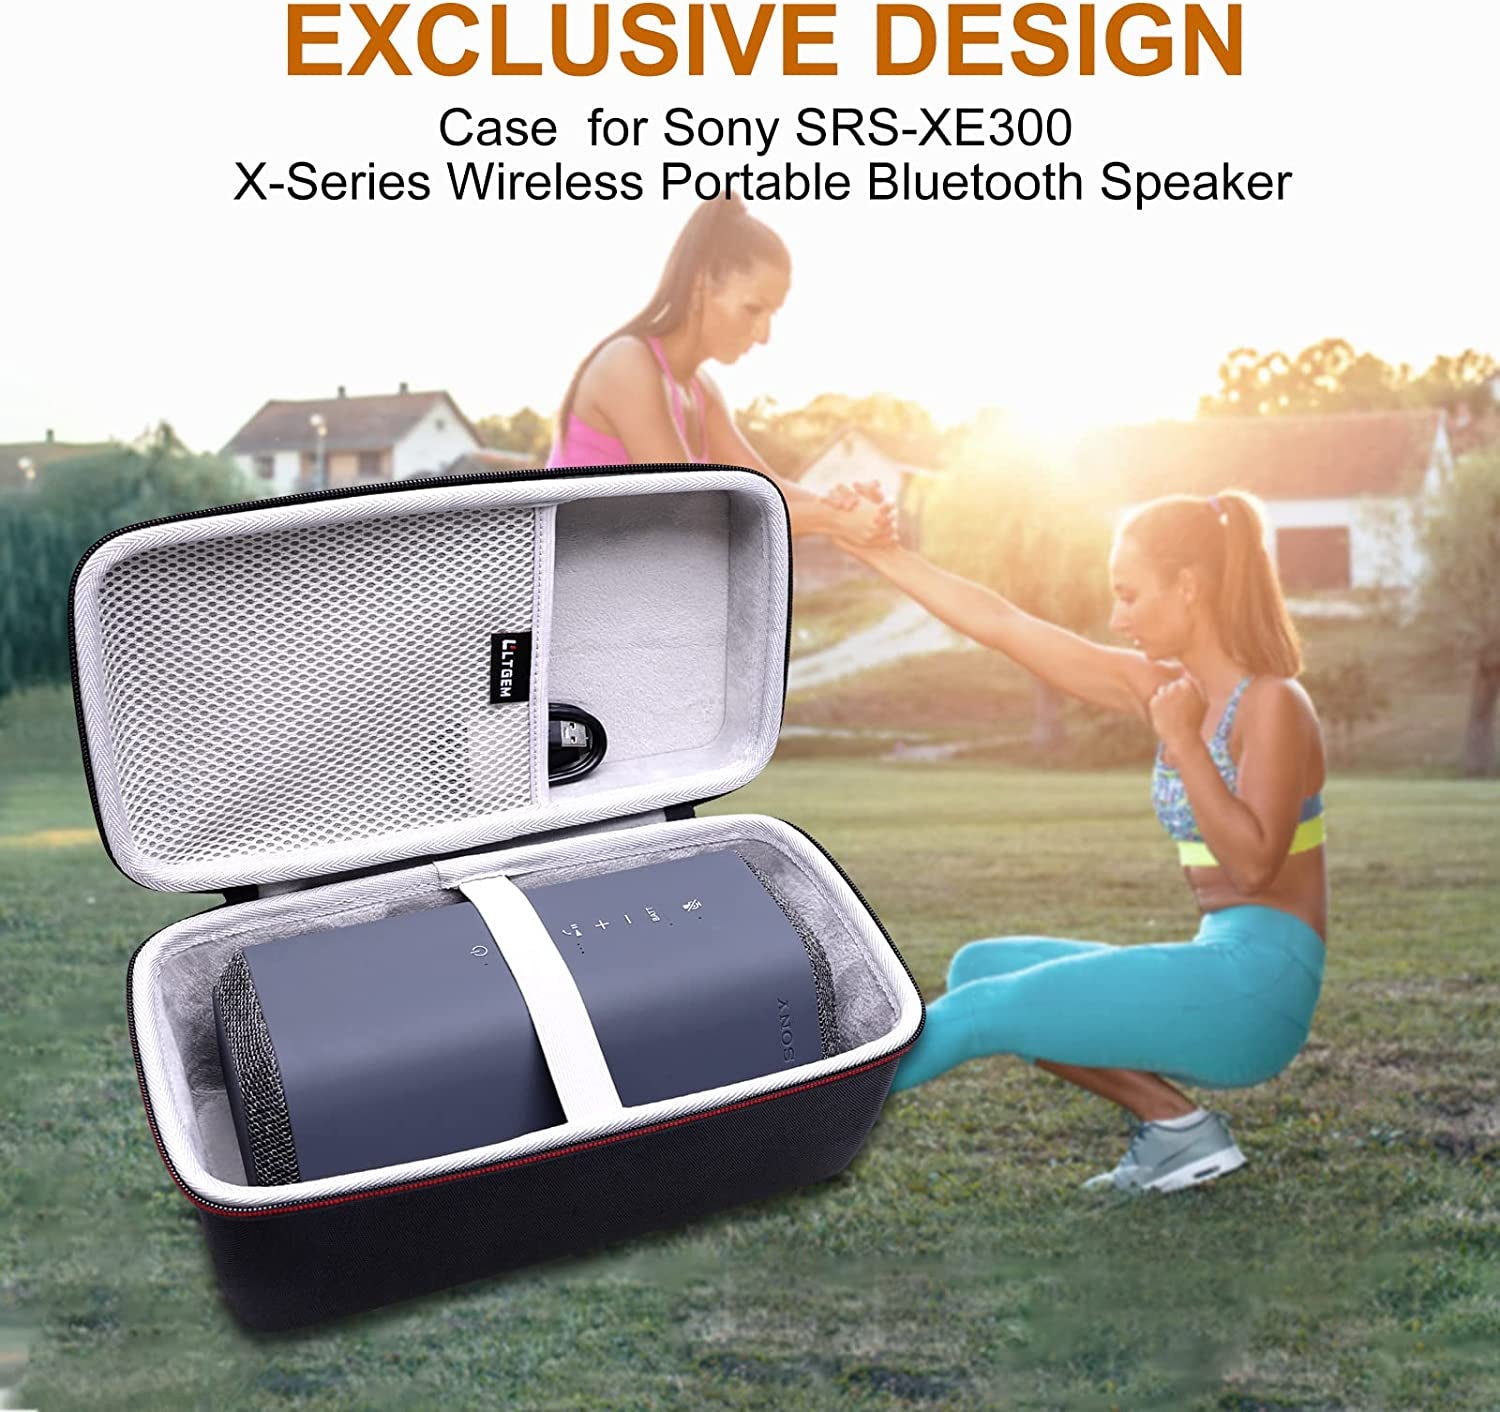 LTGEM EVA Hard Case for Sony SRS-XE300 X-Series Wireless Portable Bluetooth Speaker - Travel Protective Carrying Storage Bag